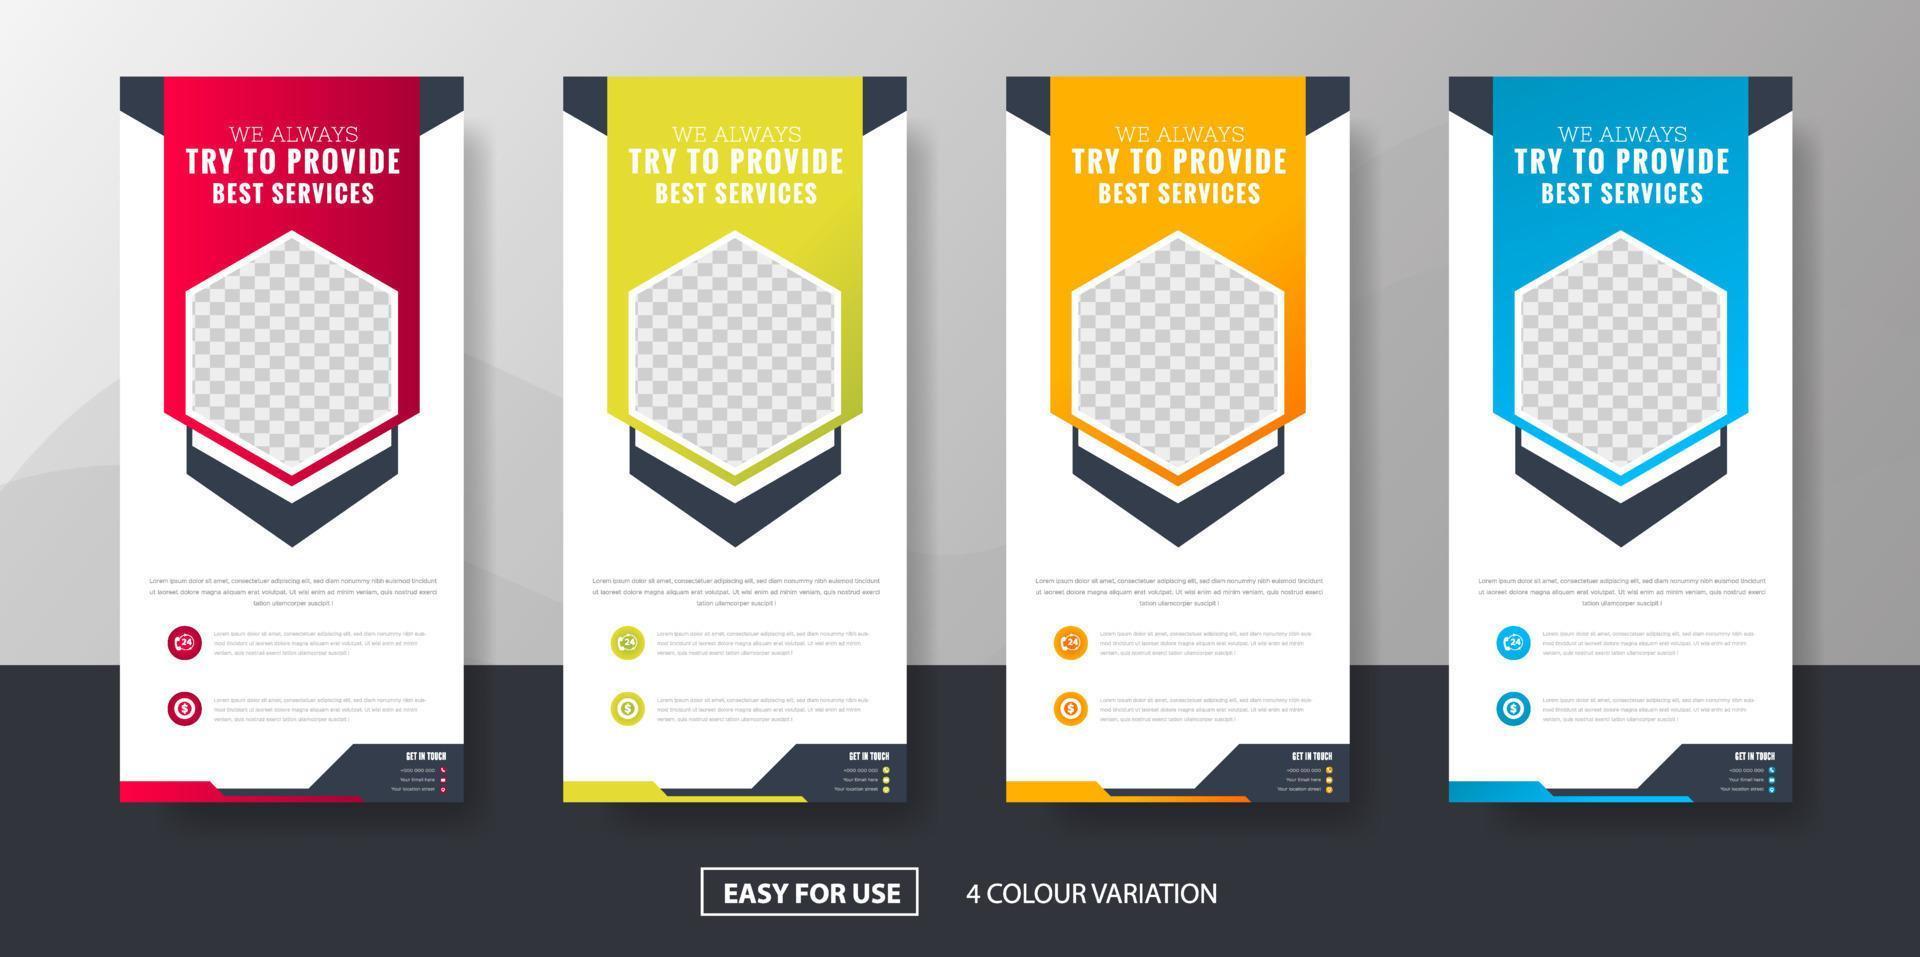 entreprise moderne roll up banner standee template vector design, abstract creative x banner, pull up banner layout for advertising, ads, exhibition, display